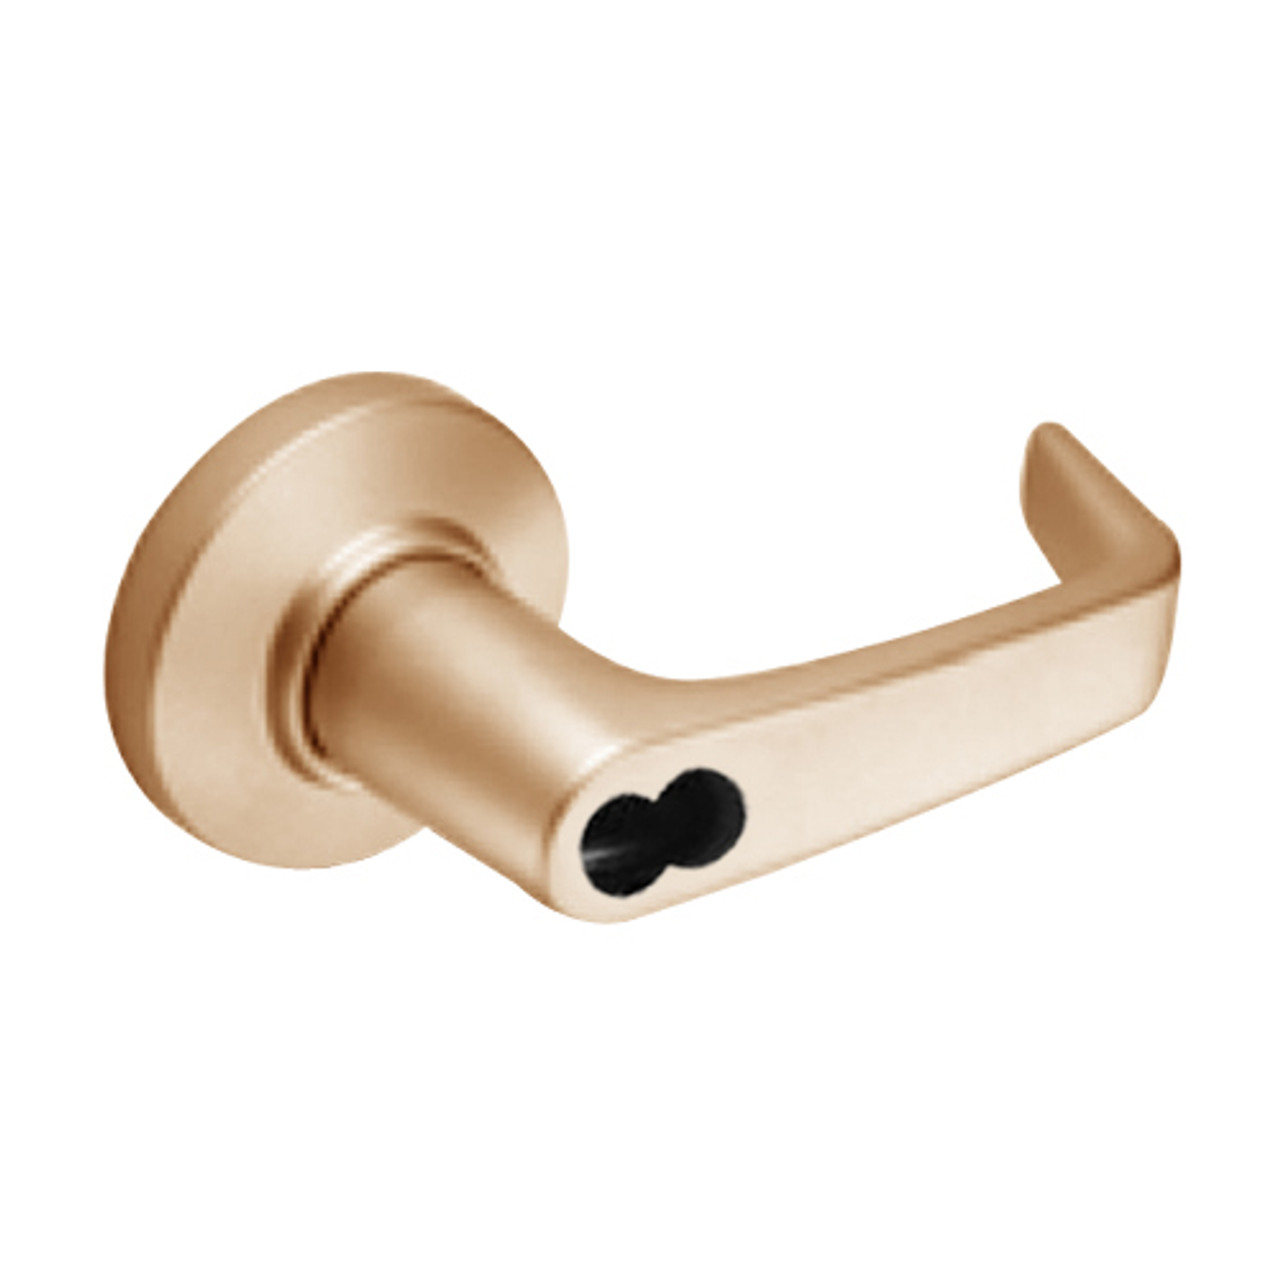 9K57W15CSTK612 Best 9K Series Institutional Cylindrical Lever Locks with Contour Angle with Return Lever Design Accept 7 Pin Best Core in Satin Bronze